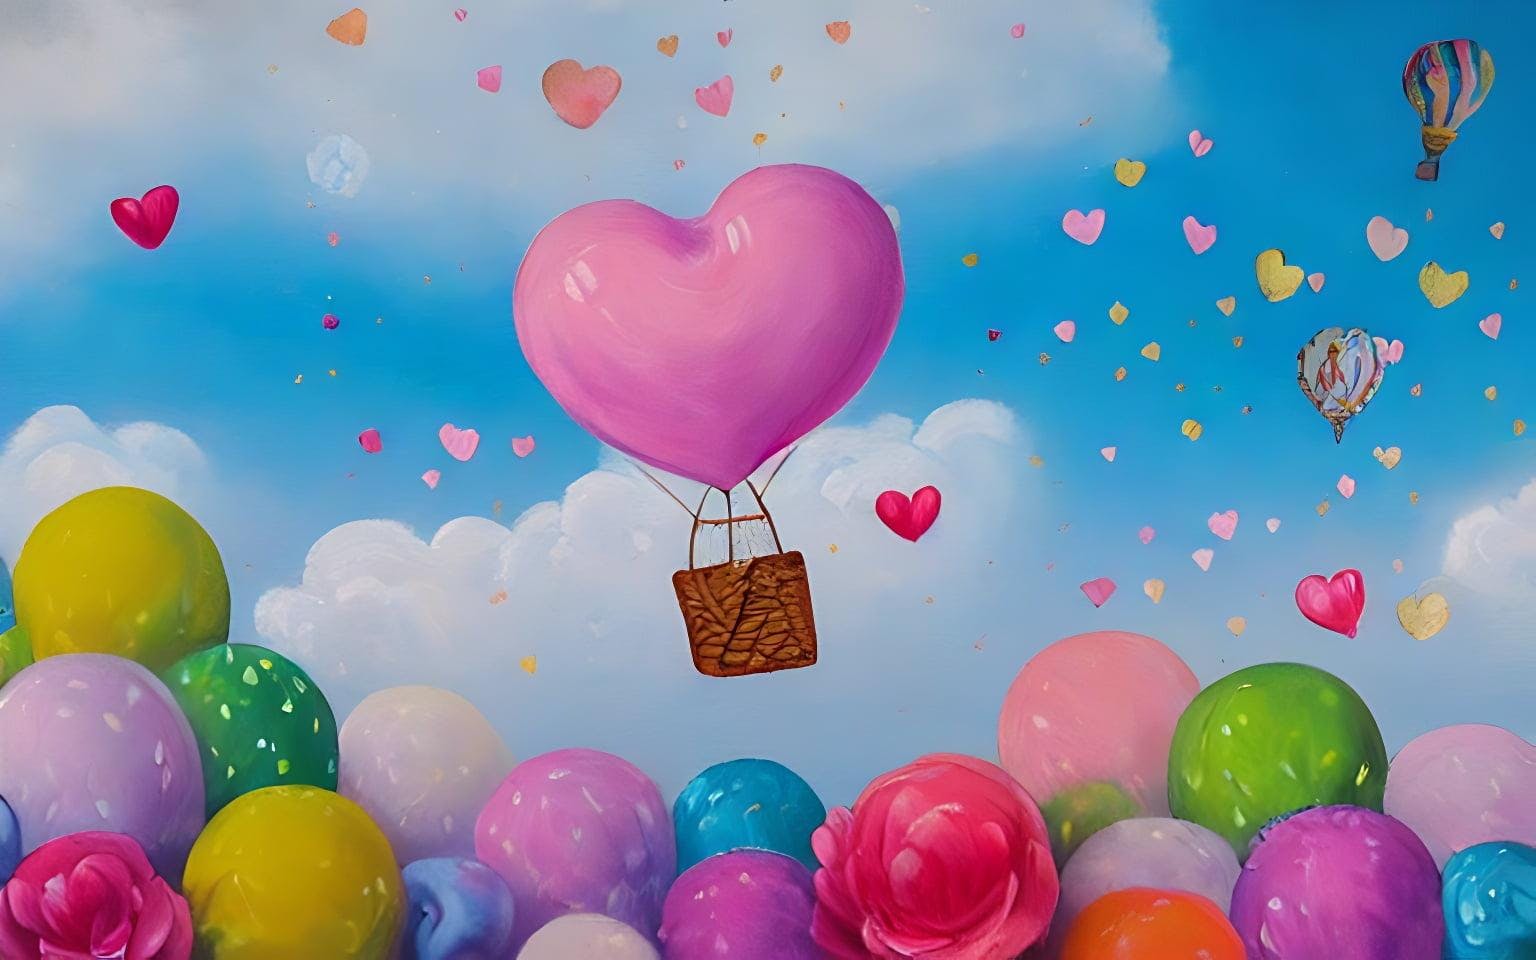 Detailed Painting That Is Beautiful And Whimsical With Cotton Candy Clouds And Balloon Hearts And Flowers Inside